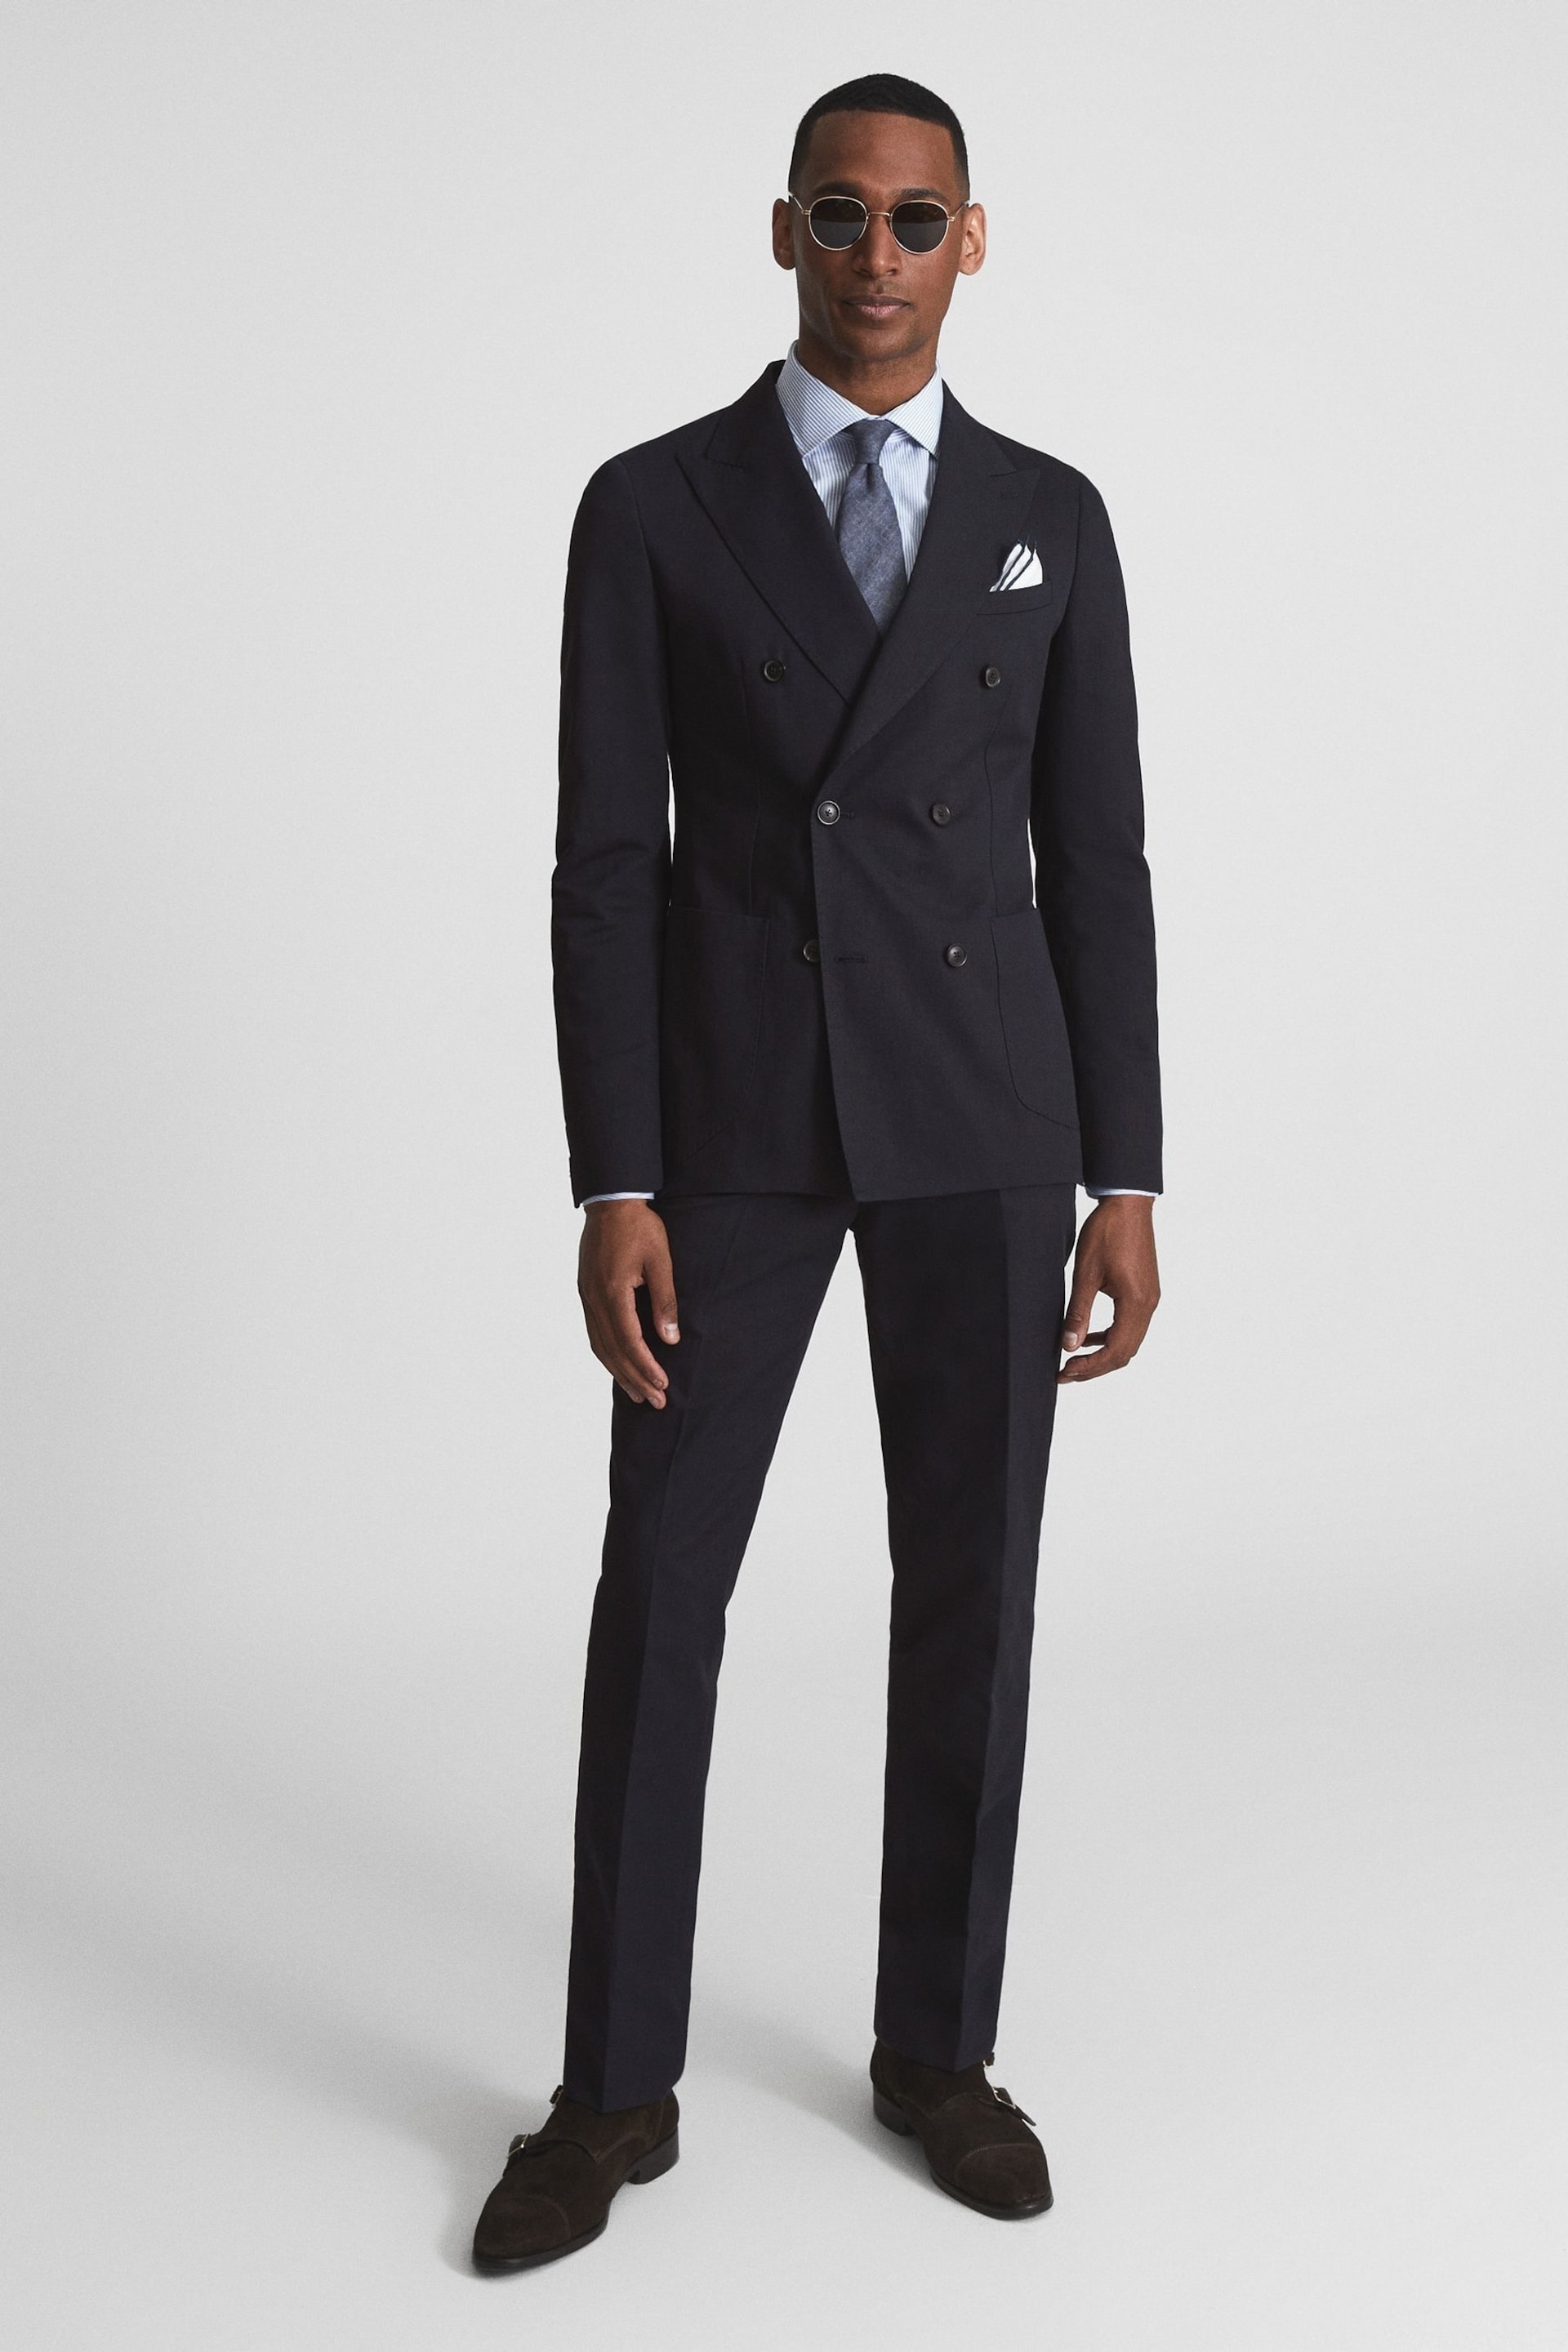 Reiss Navy Class Double Breasted Cotton-Linen Blazer - Image 3 of 7